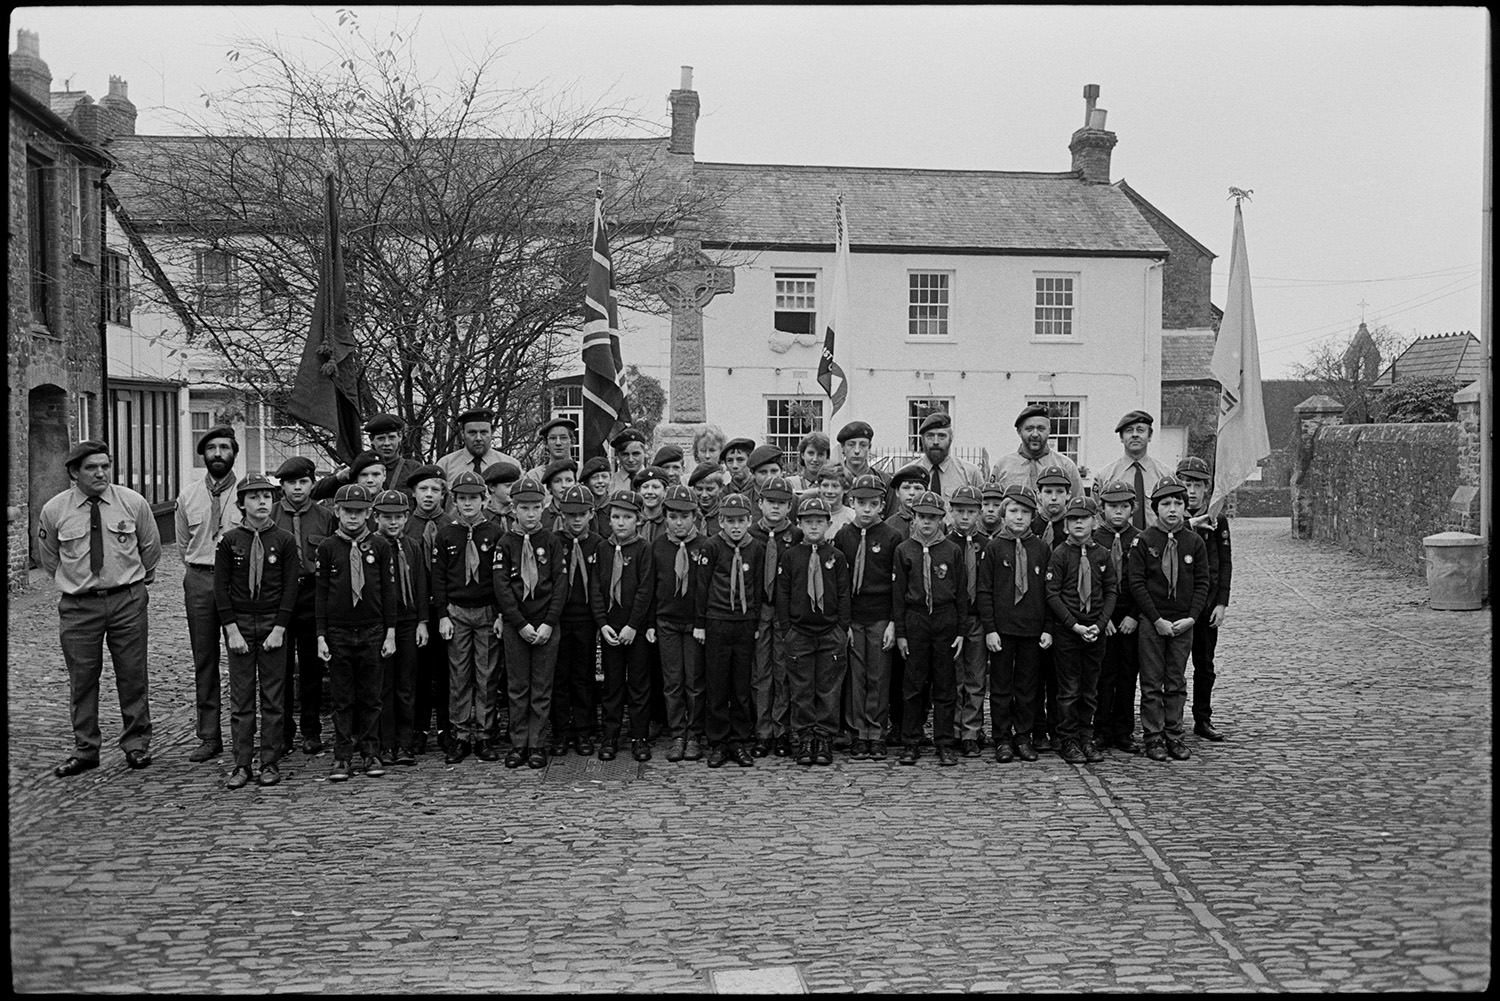 Parade at War Memorial, two minute silence, march to church, chatting afterwards, scouts.
[A group of Scouts with their leaders, standing in the cobbled town square in Chulmleigh, during Remembrance Sunday or Armistice Day. They are holding up four flags, and standing in front of the War Memorial, with town houses in the background.]